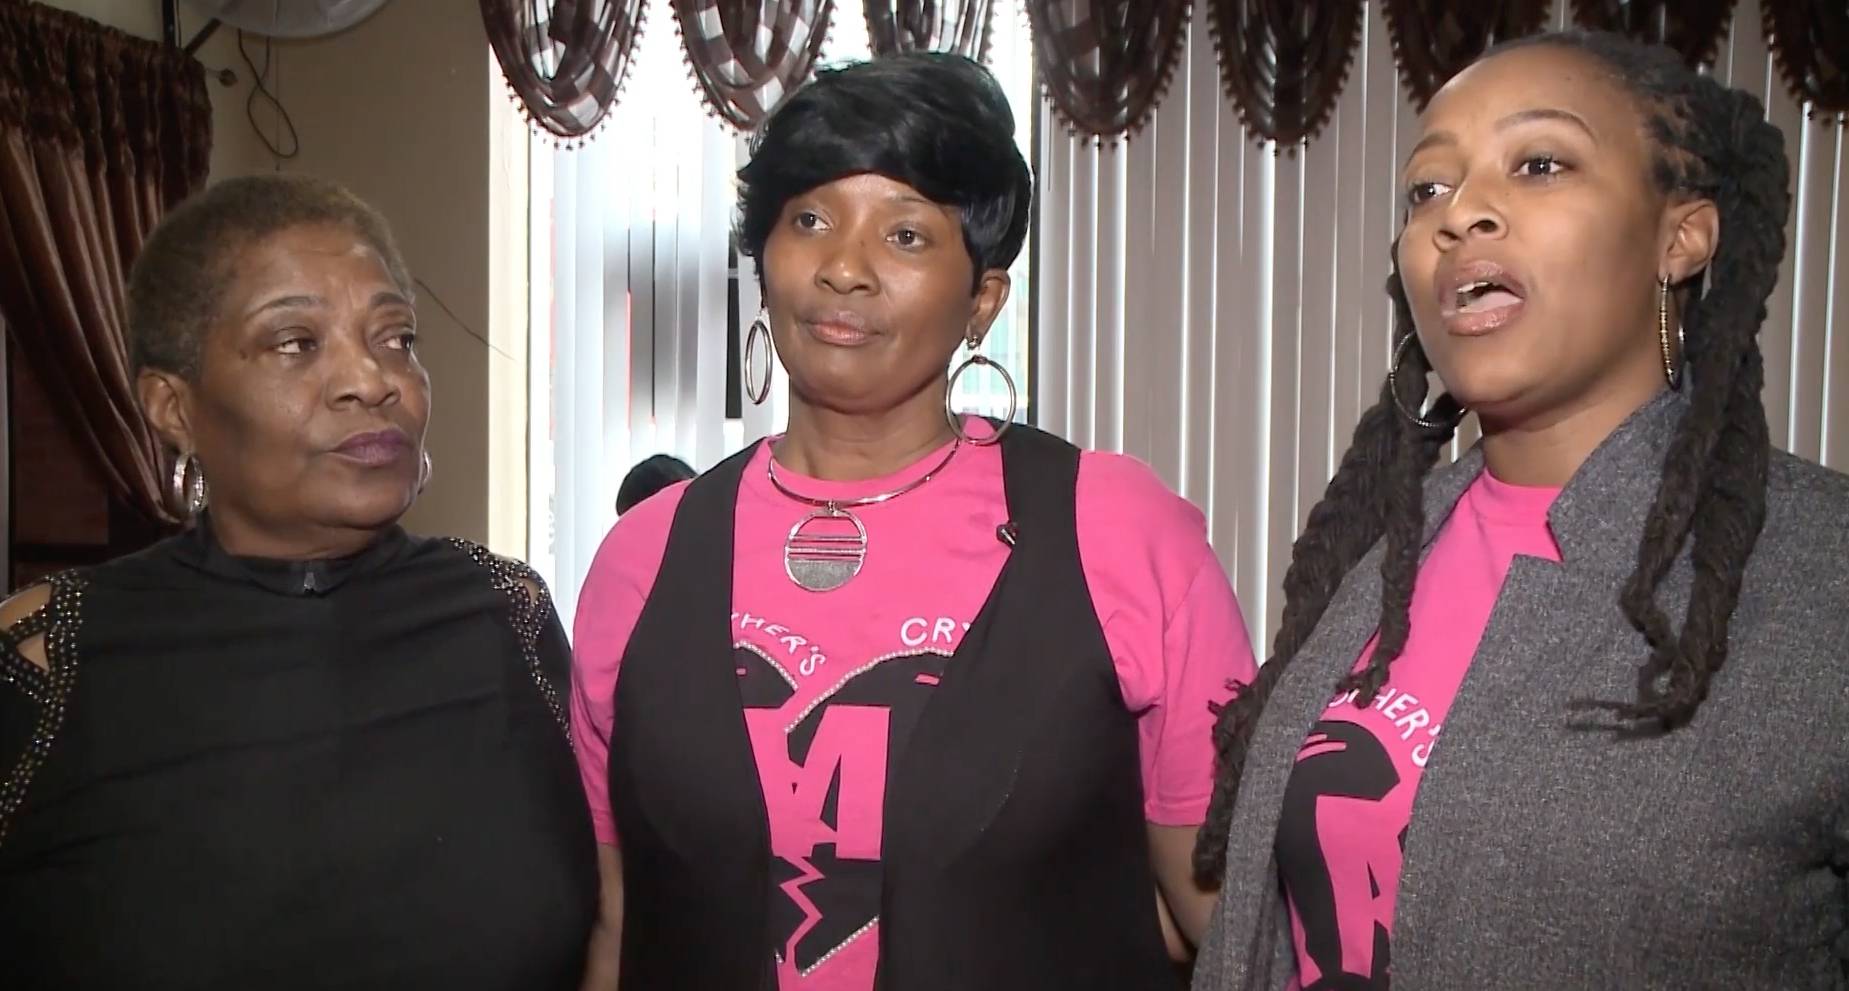 Mothers grieve together and take action to stop gun violence on BET News.